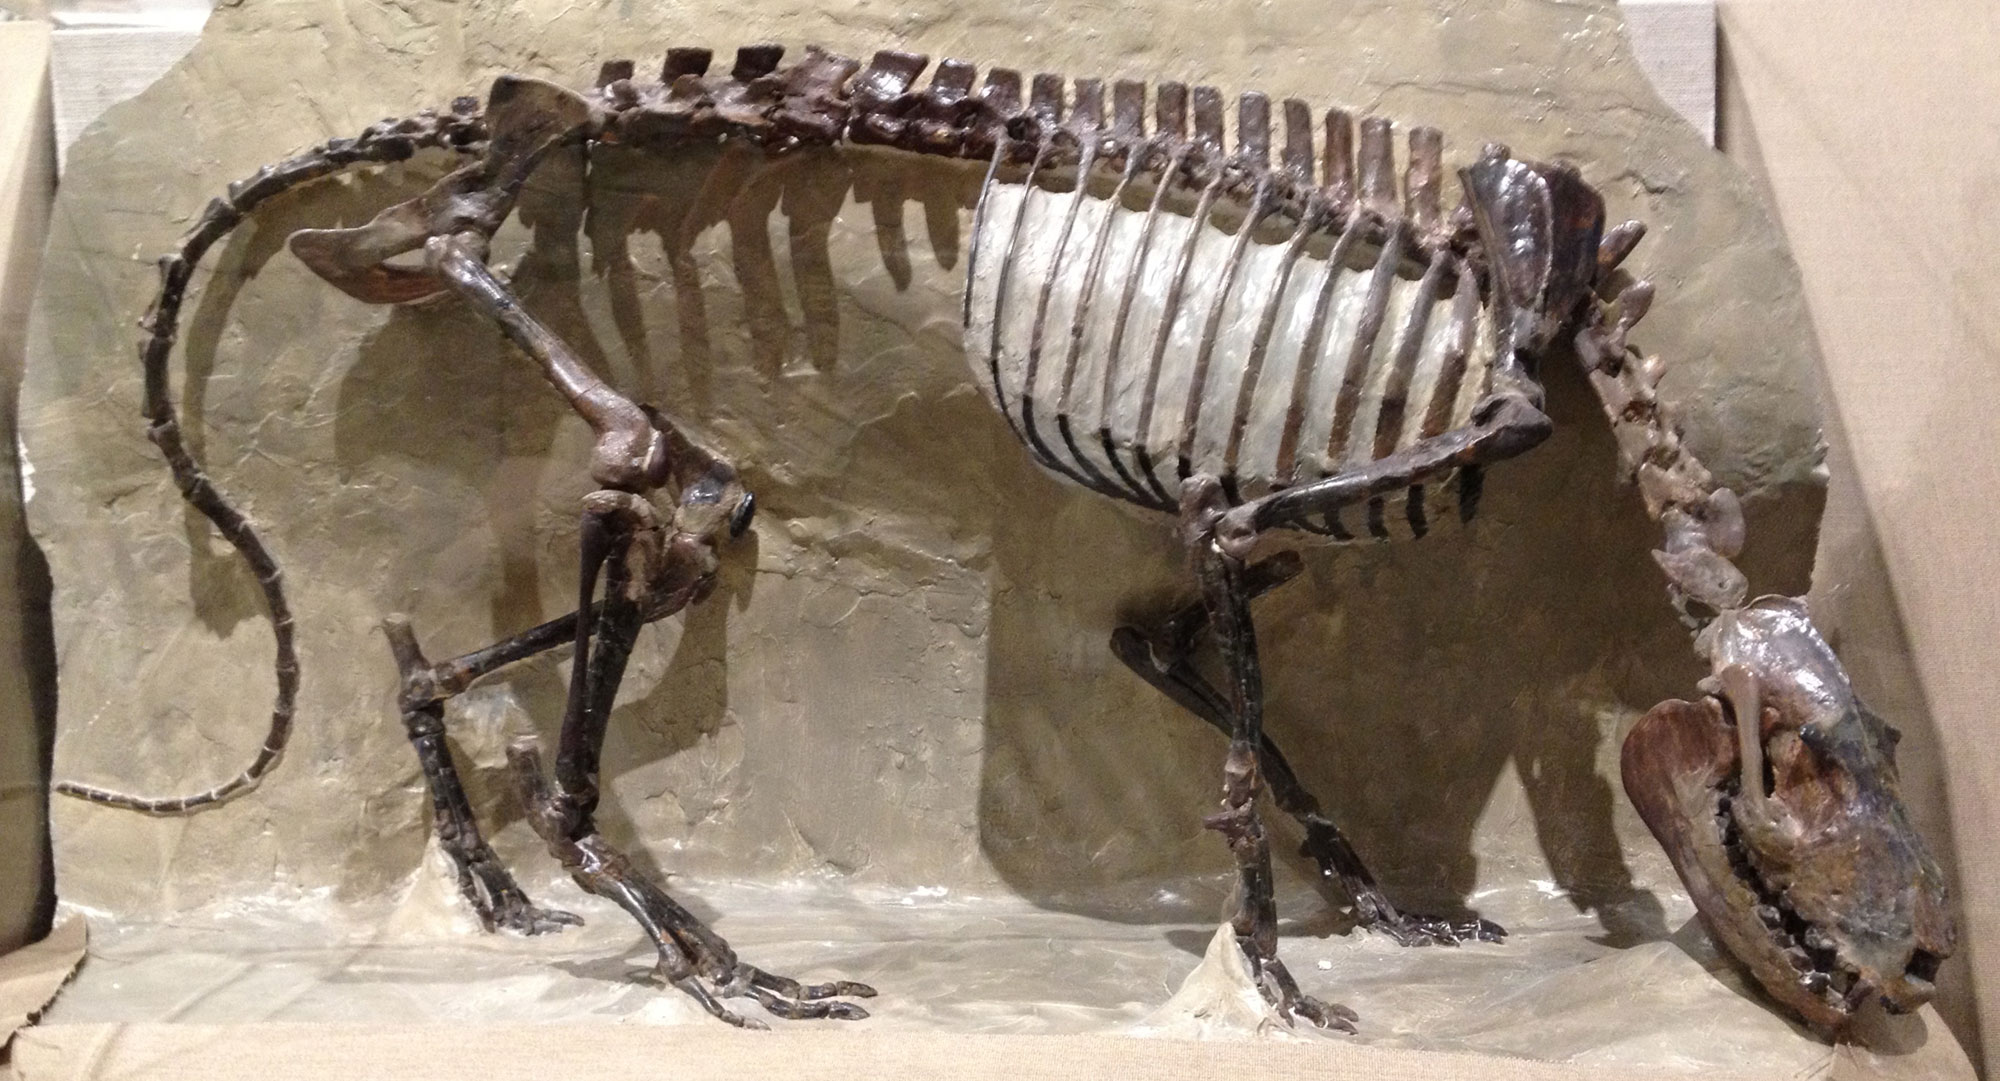 Photograph of a reconstructed mammal skeleton on display in a museum. The mammal is a herbivore that has four legs, a large rectangular skull, a medium-length neck, and a relatively long tail. The feet have toes, not hooves.